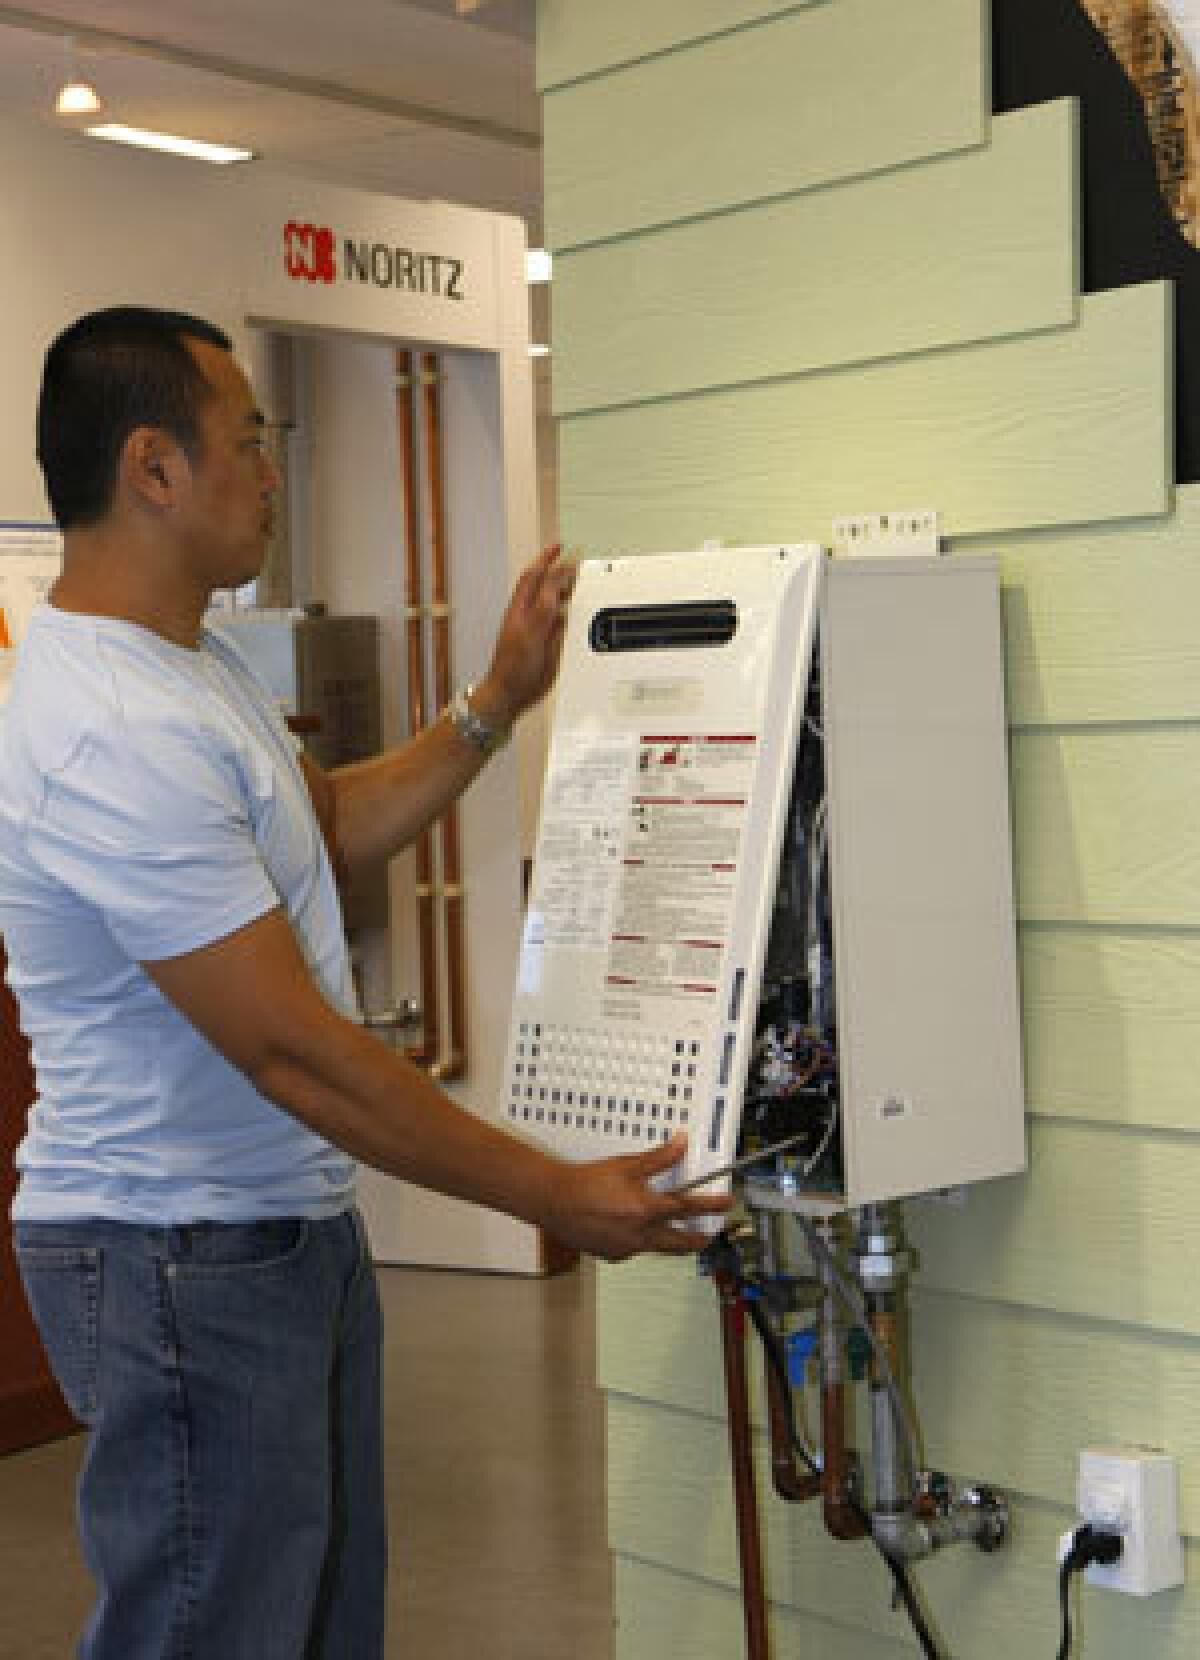 Before installing a tankless water heater like the one above, consider the specifications of home and machine